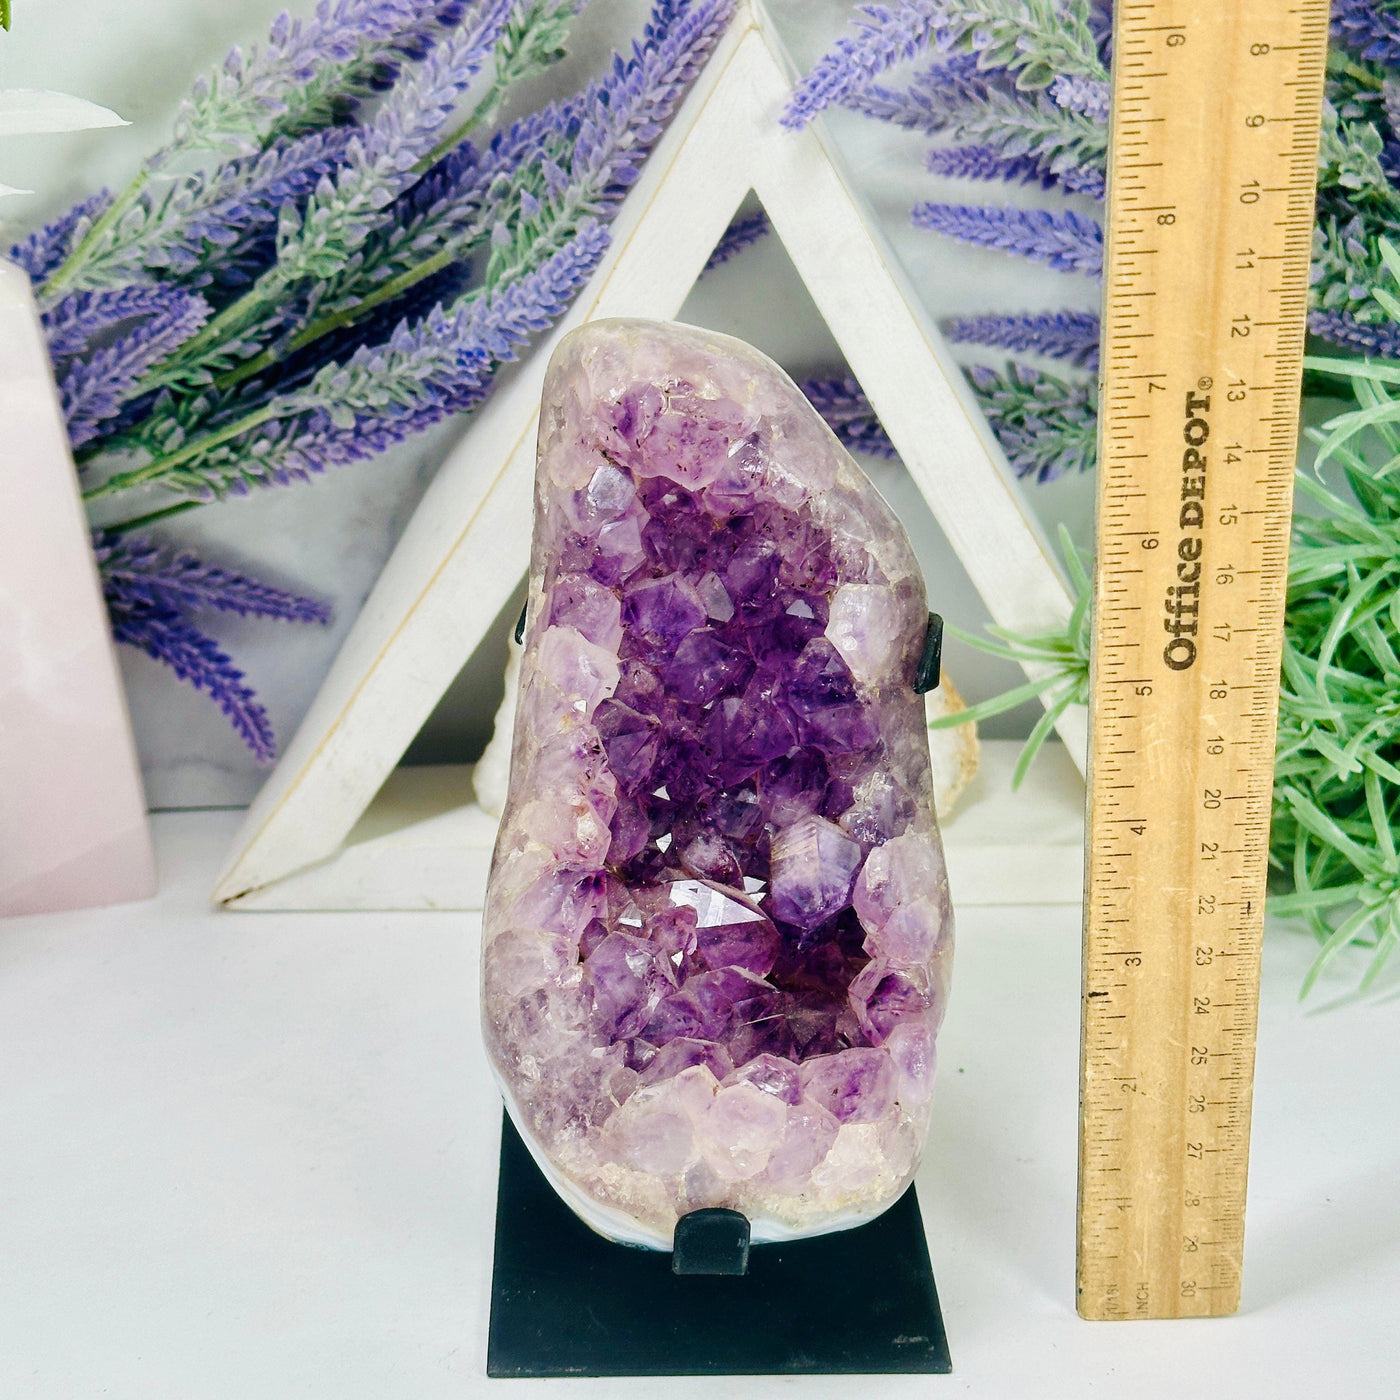 Amethyst Cluster on Black Metal Stand - Polished Crystal Cluster with ruler for size reference